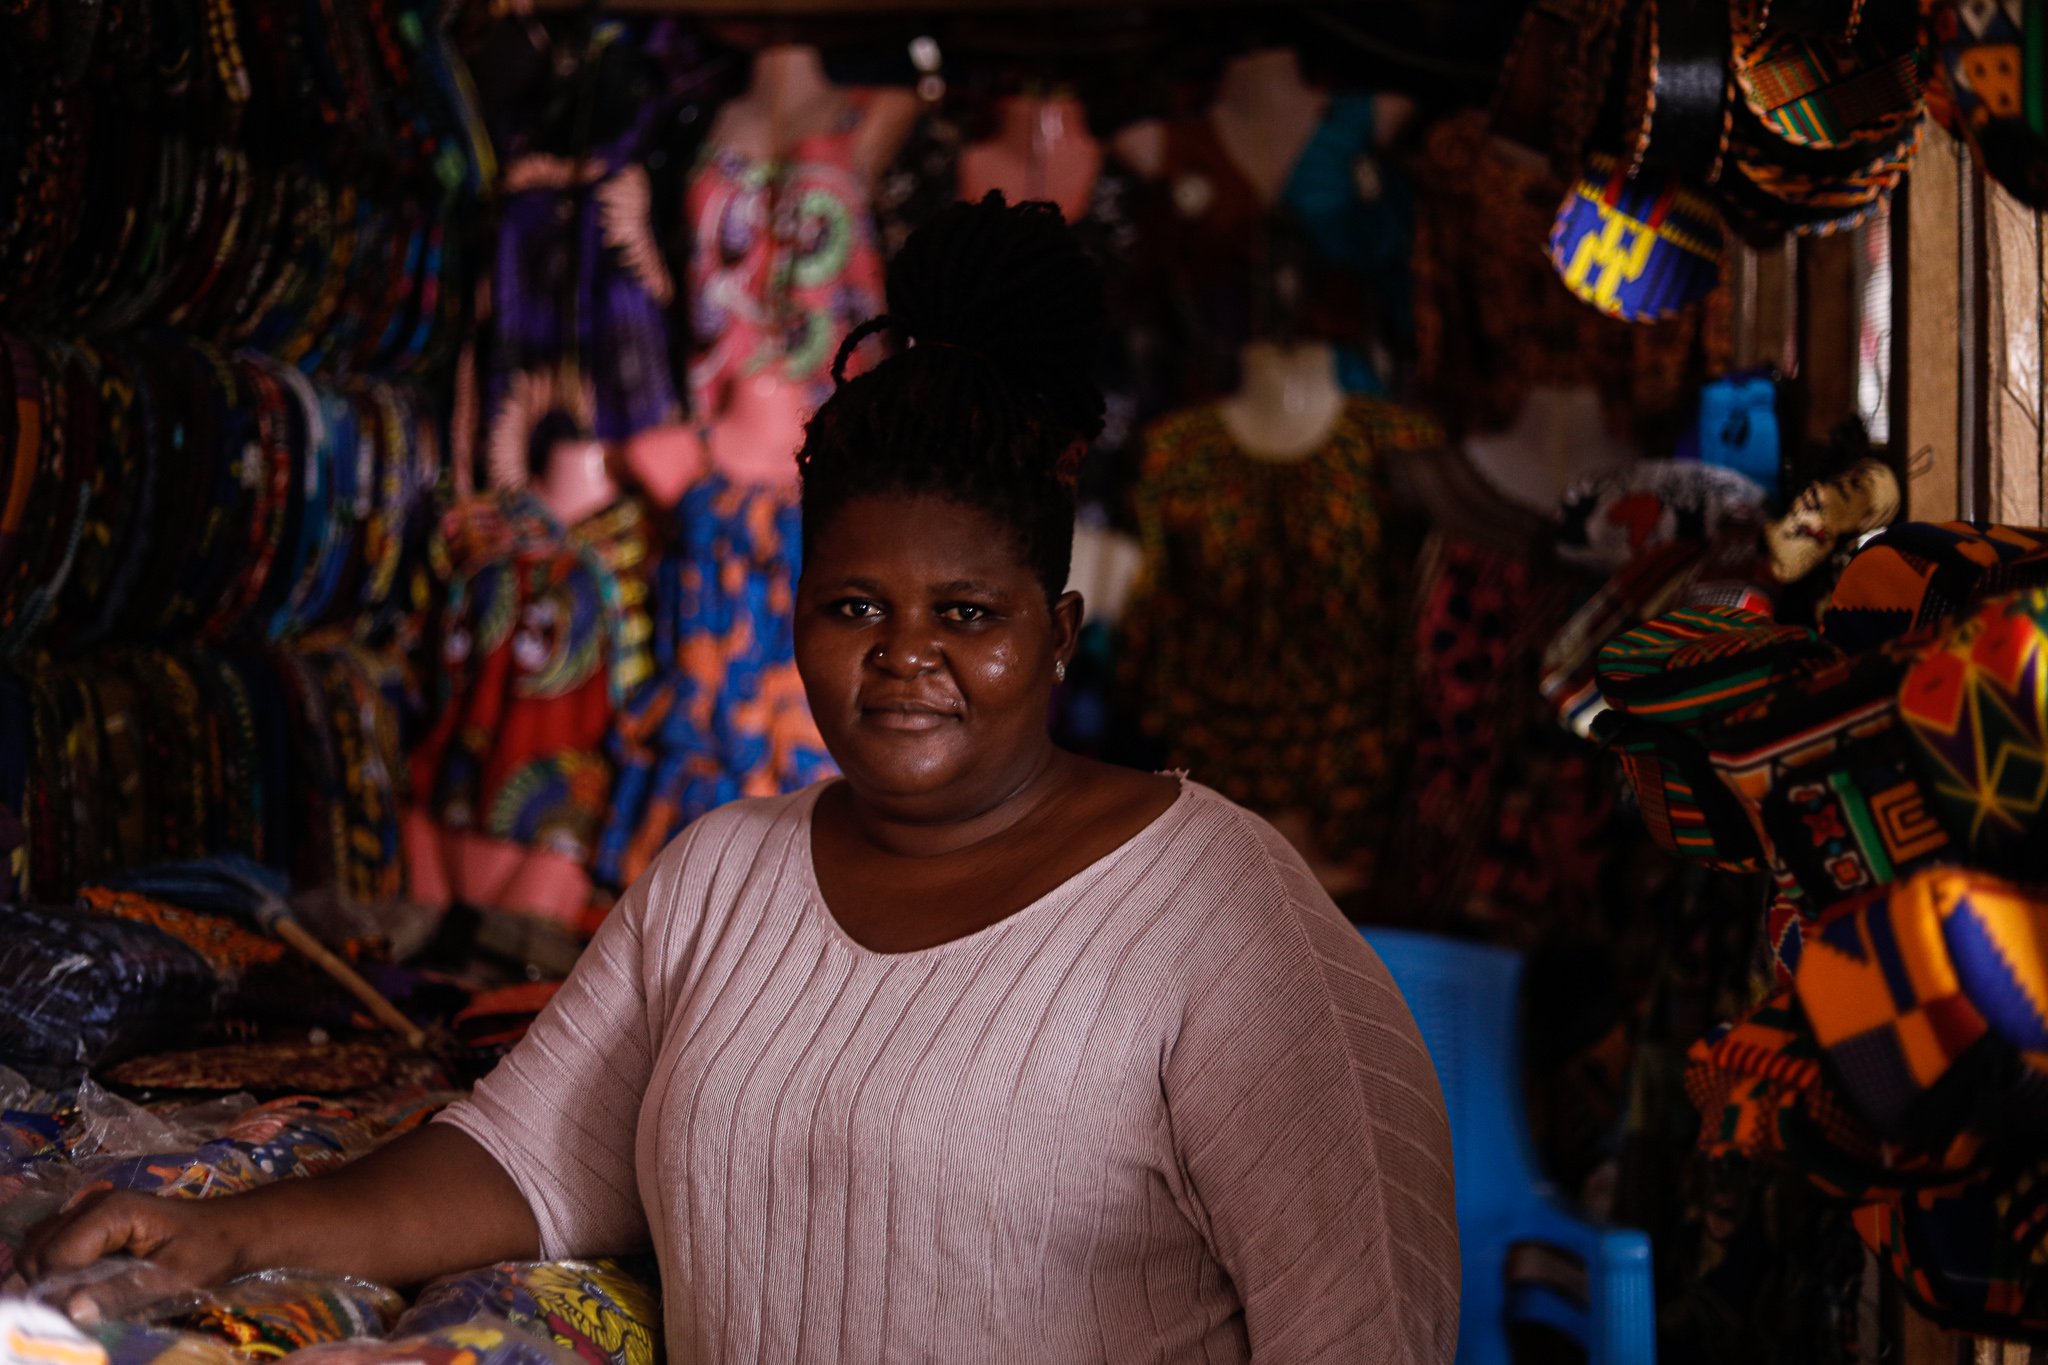 Photostory: A trader at Big Market in Freetown